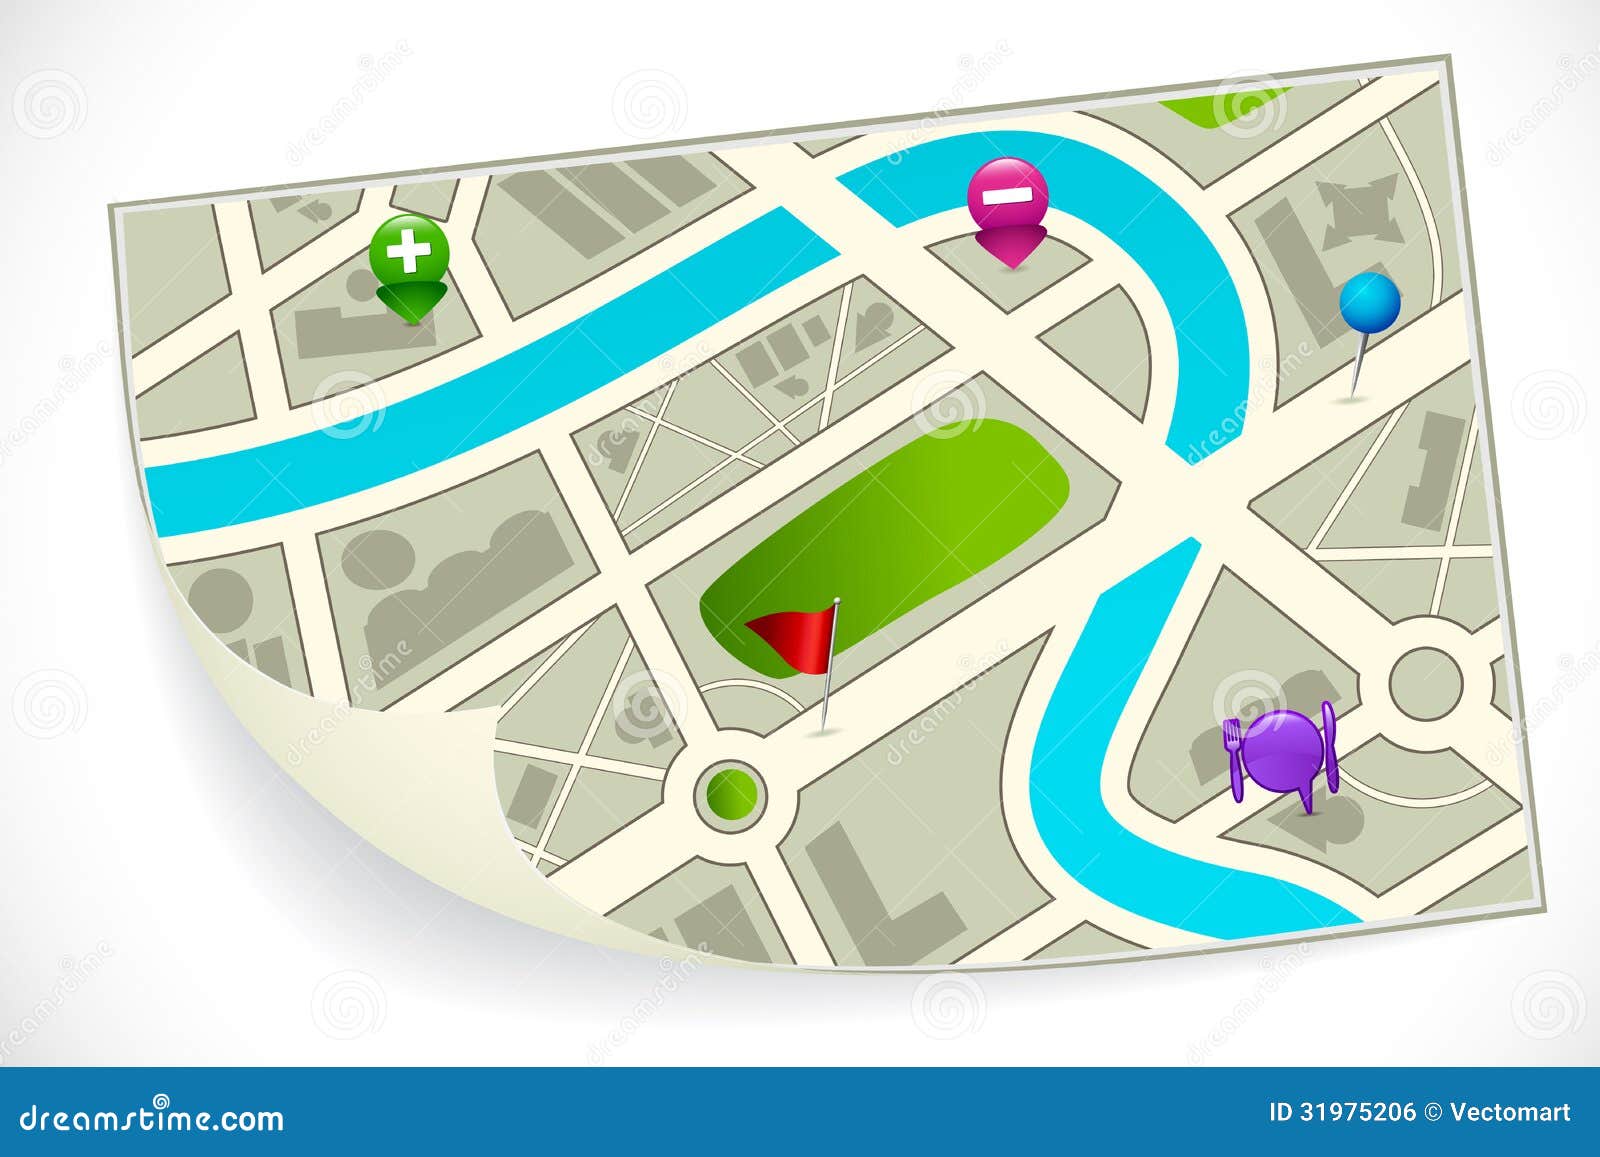 Road Route Map Royalty Free Stock Image - Image: 31975206